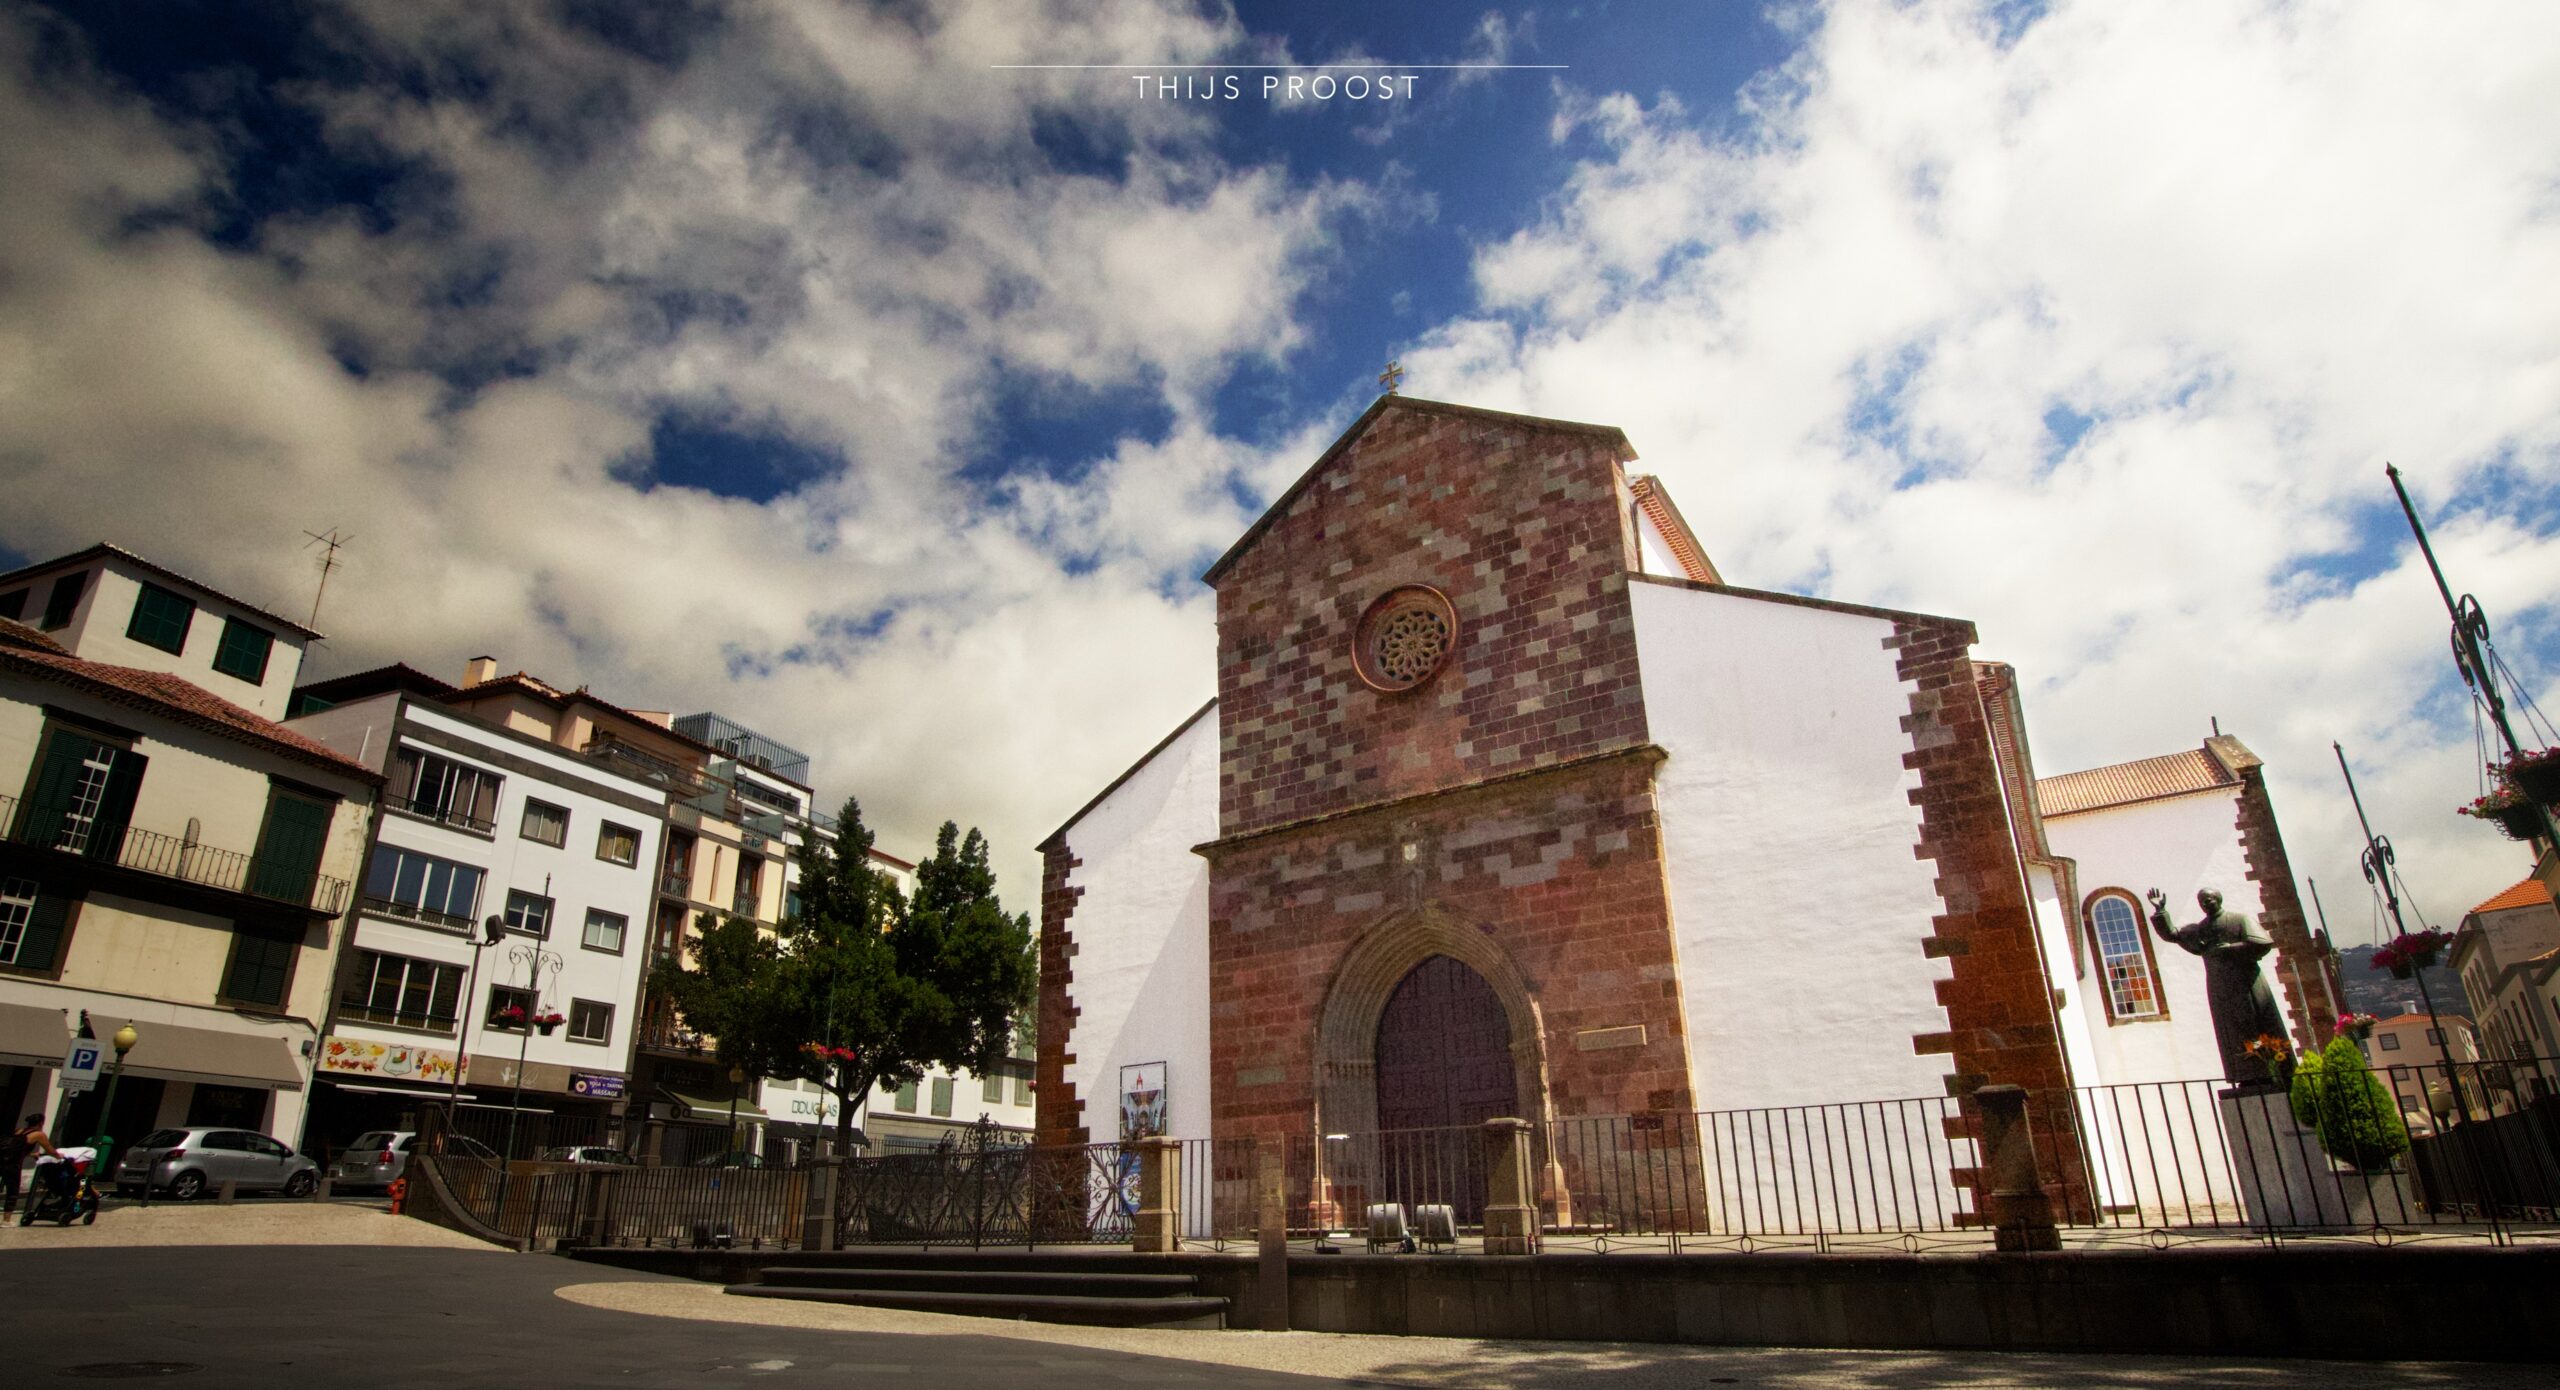 The church of Funchal at the island of Madeira. A cloudy but sunny sky at the top of the image.